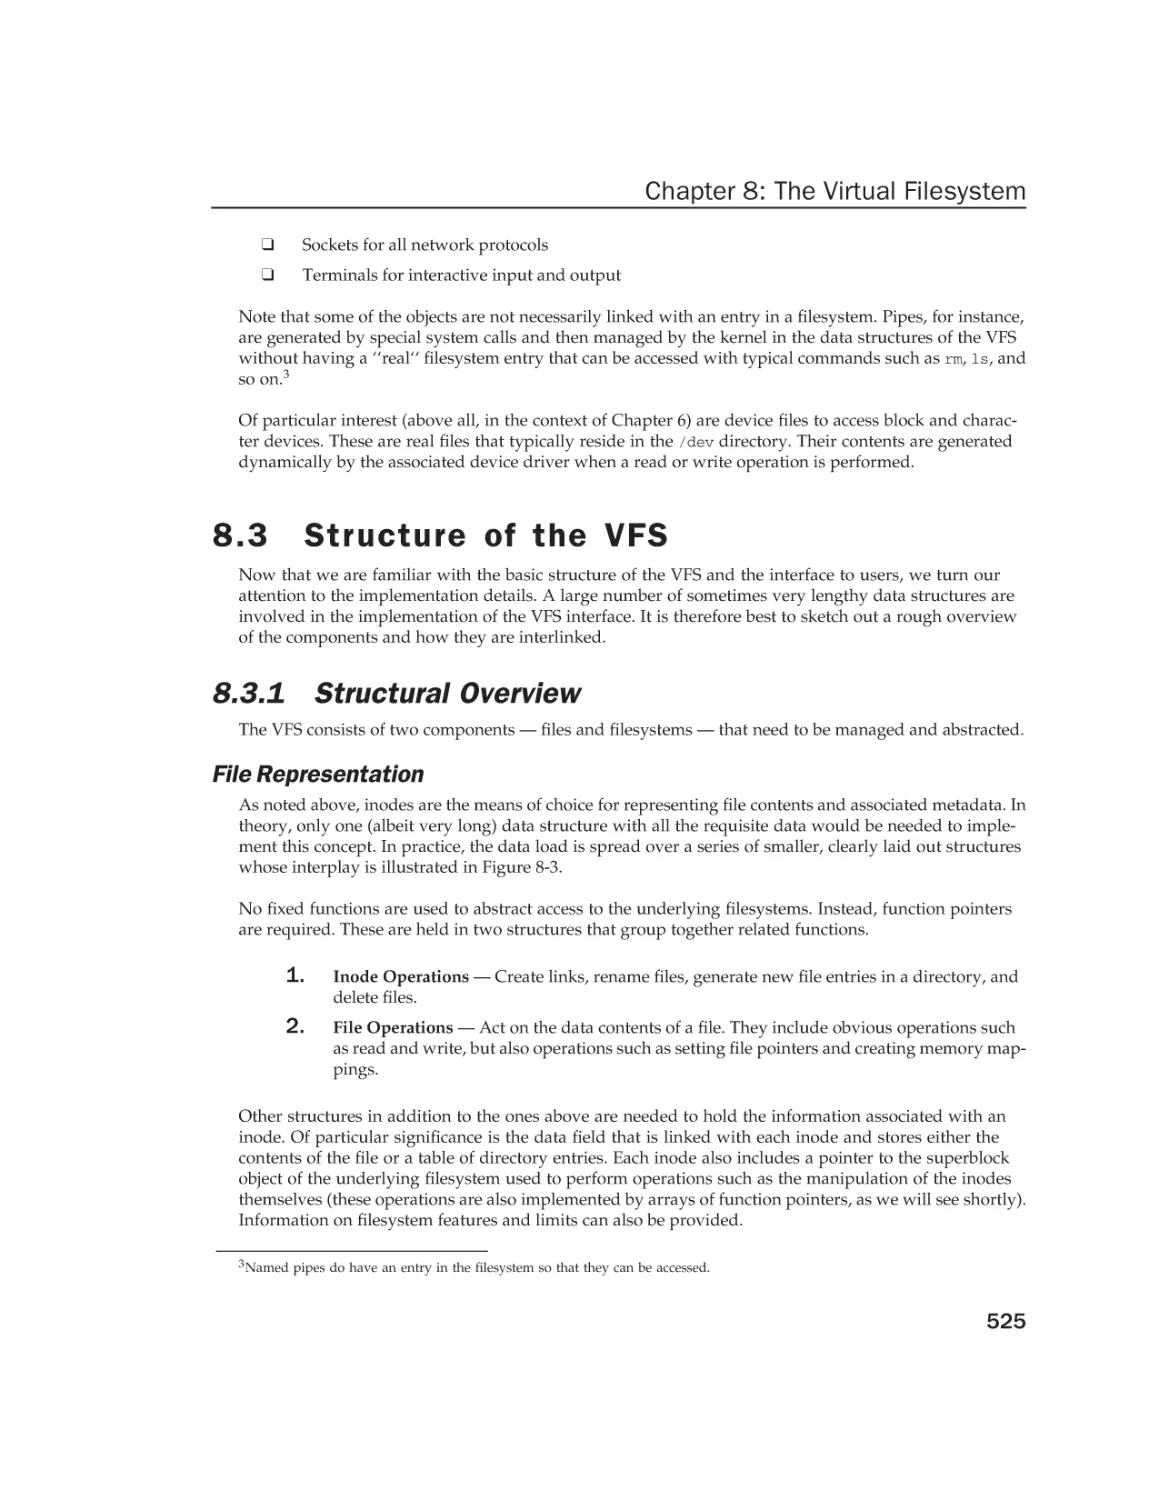 8.3 Structure of the VFS